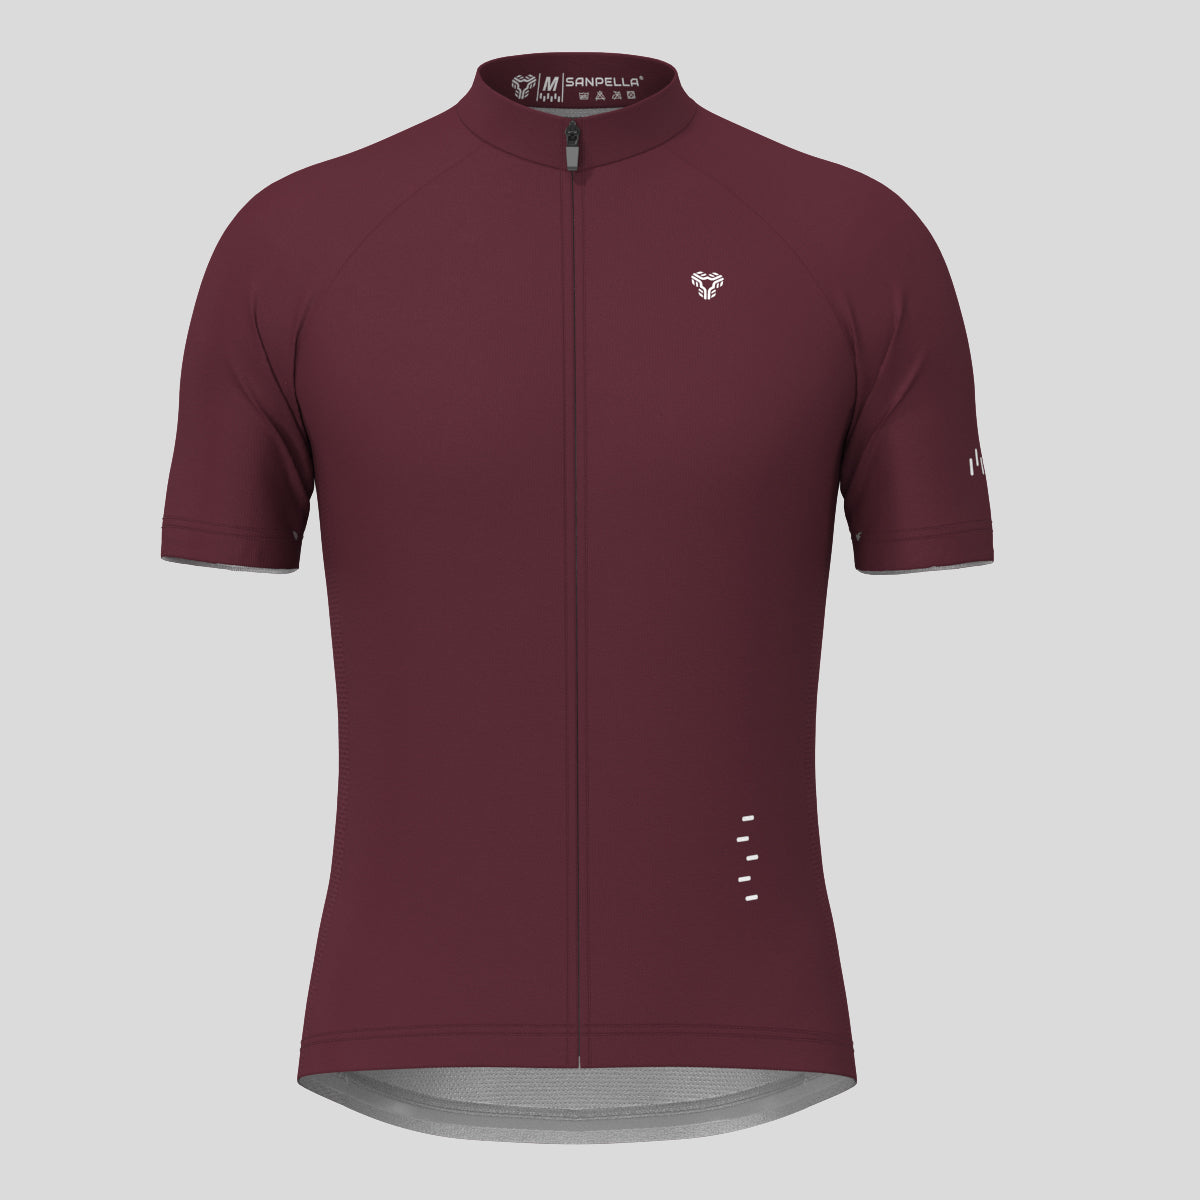 Men's Minimal Solid Cycling Jersey -Plum